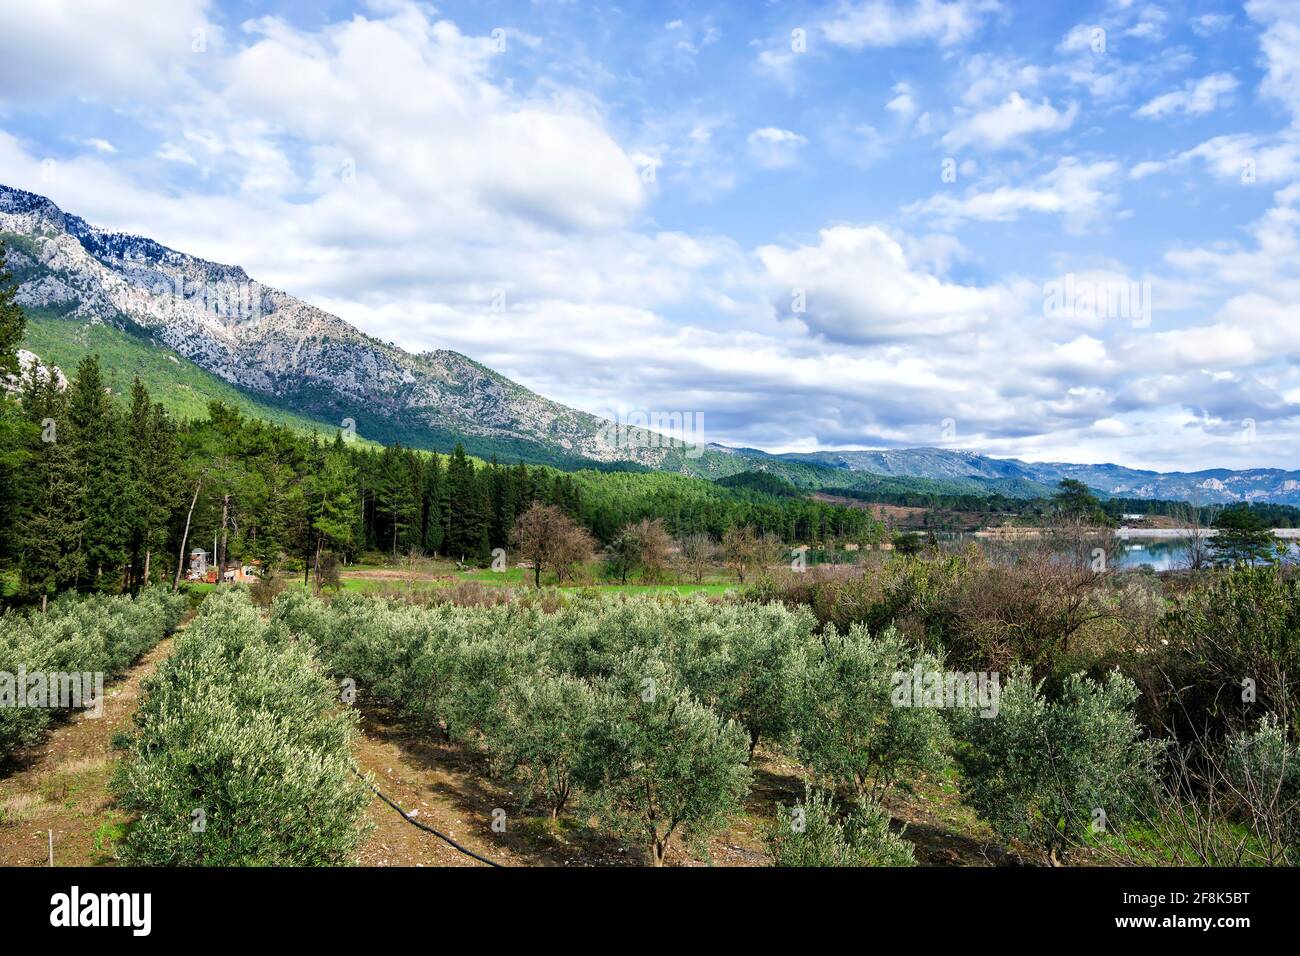 Olive grove with the Taurus mountains in the background in Turkey Stock Photo